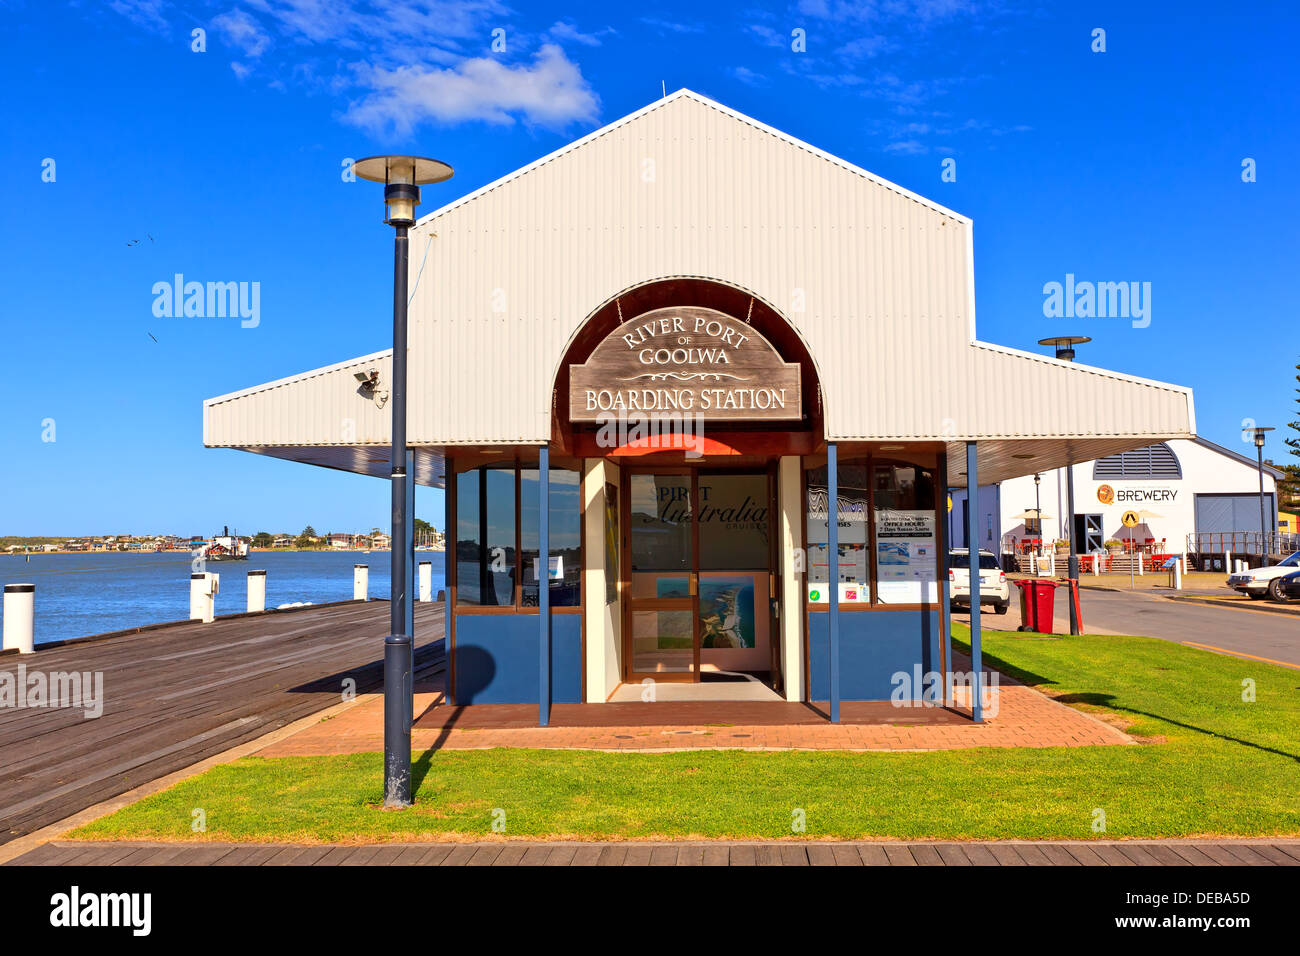 River Port of Goolwa boarding station on the Murray River in South Australia Stock Photo